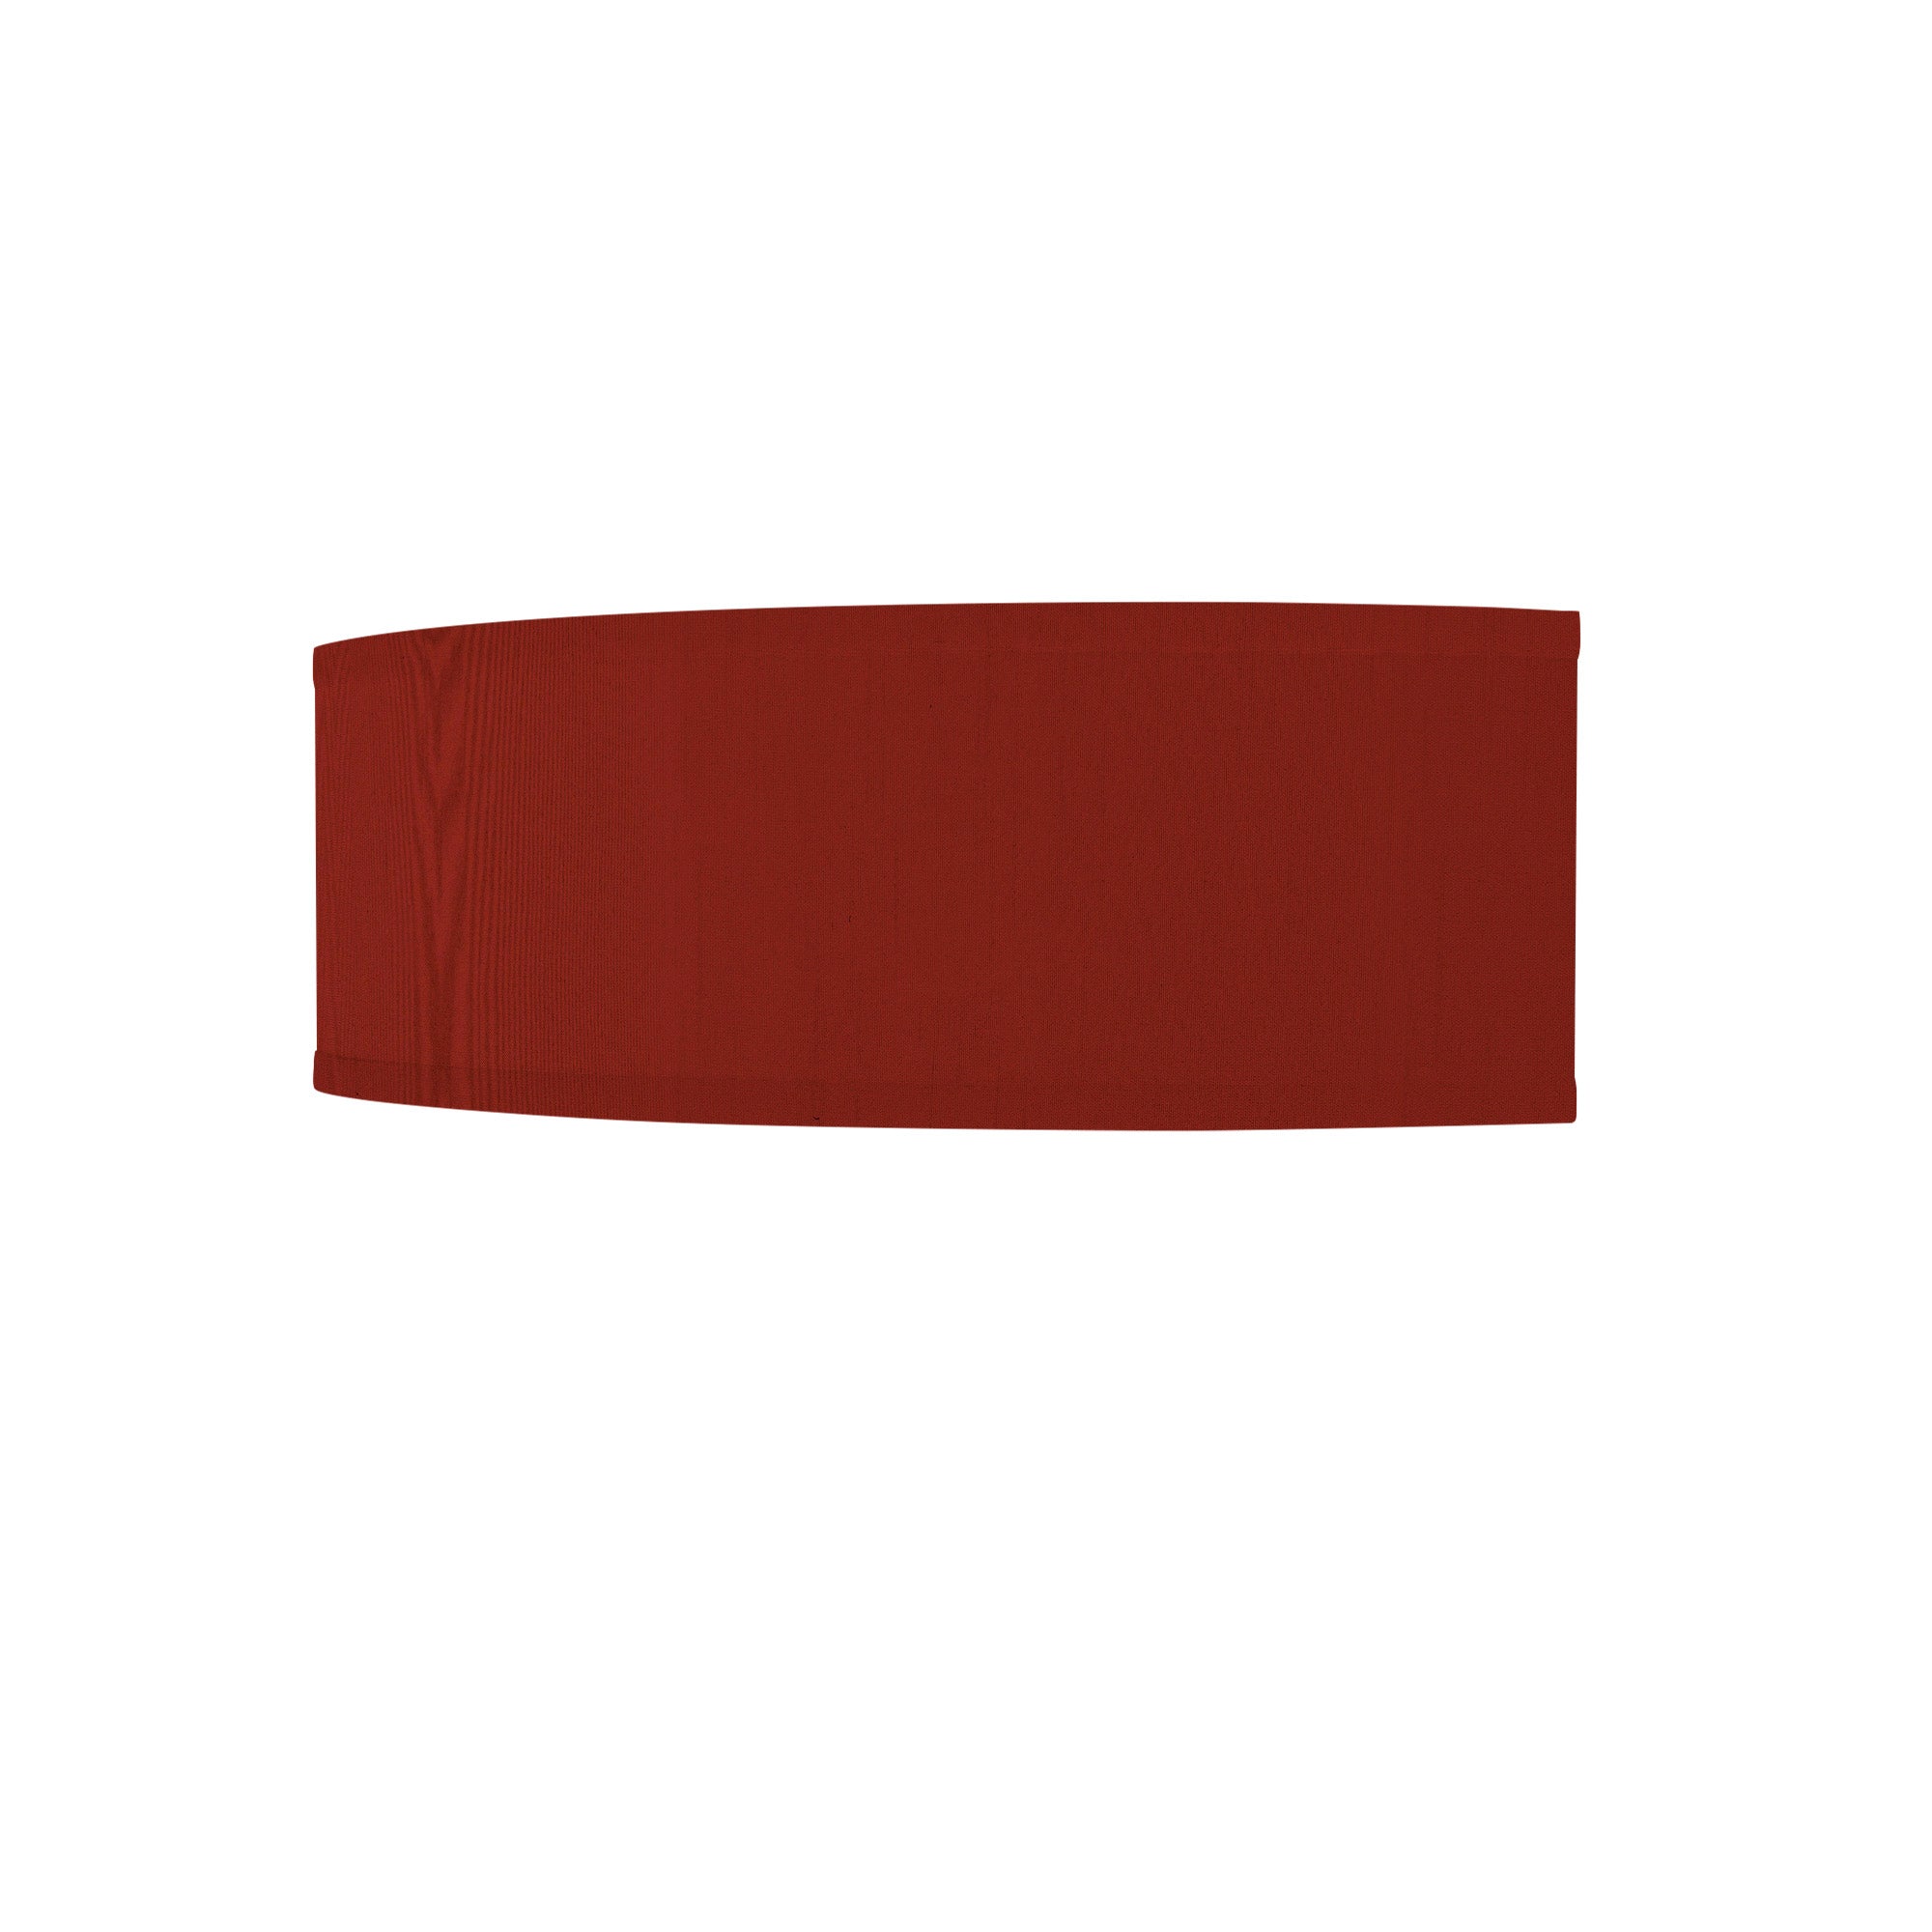 The Mora Wall Sconce from Seascape Fixtures with a silk shade in burgundy color.